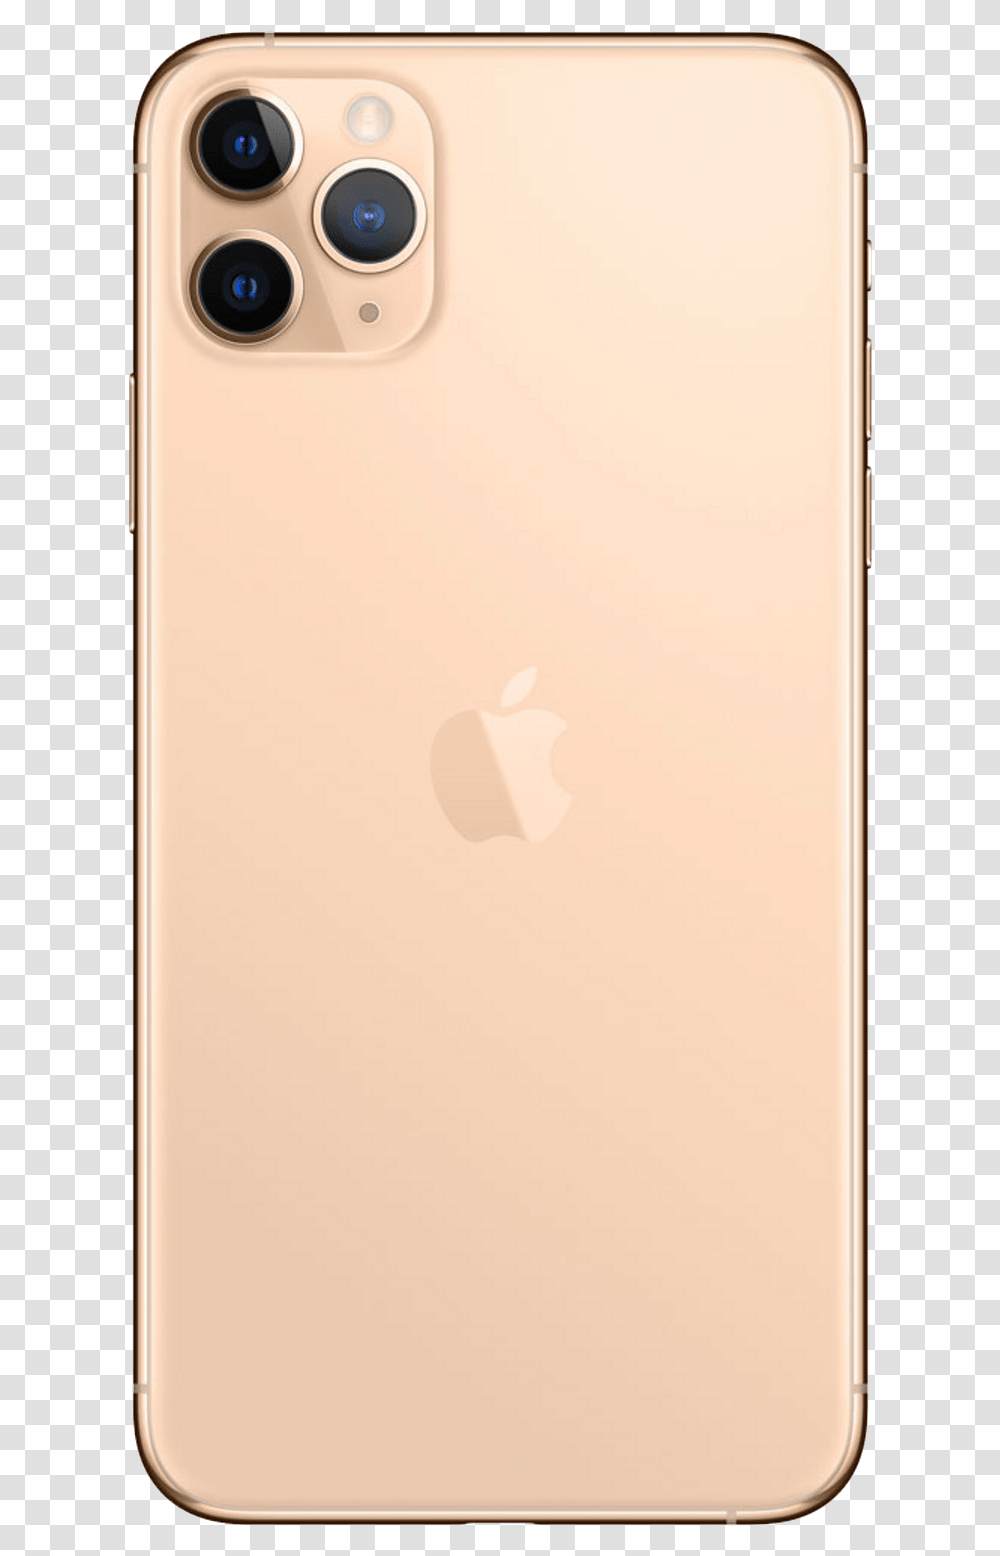 Iphone 11 Clipart Picsart Iphone 11 Pro Max, Mobile Phone, Electronics, Cell Phone Transparent Png